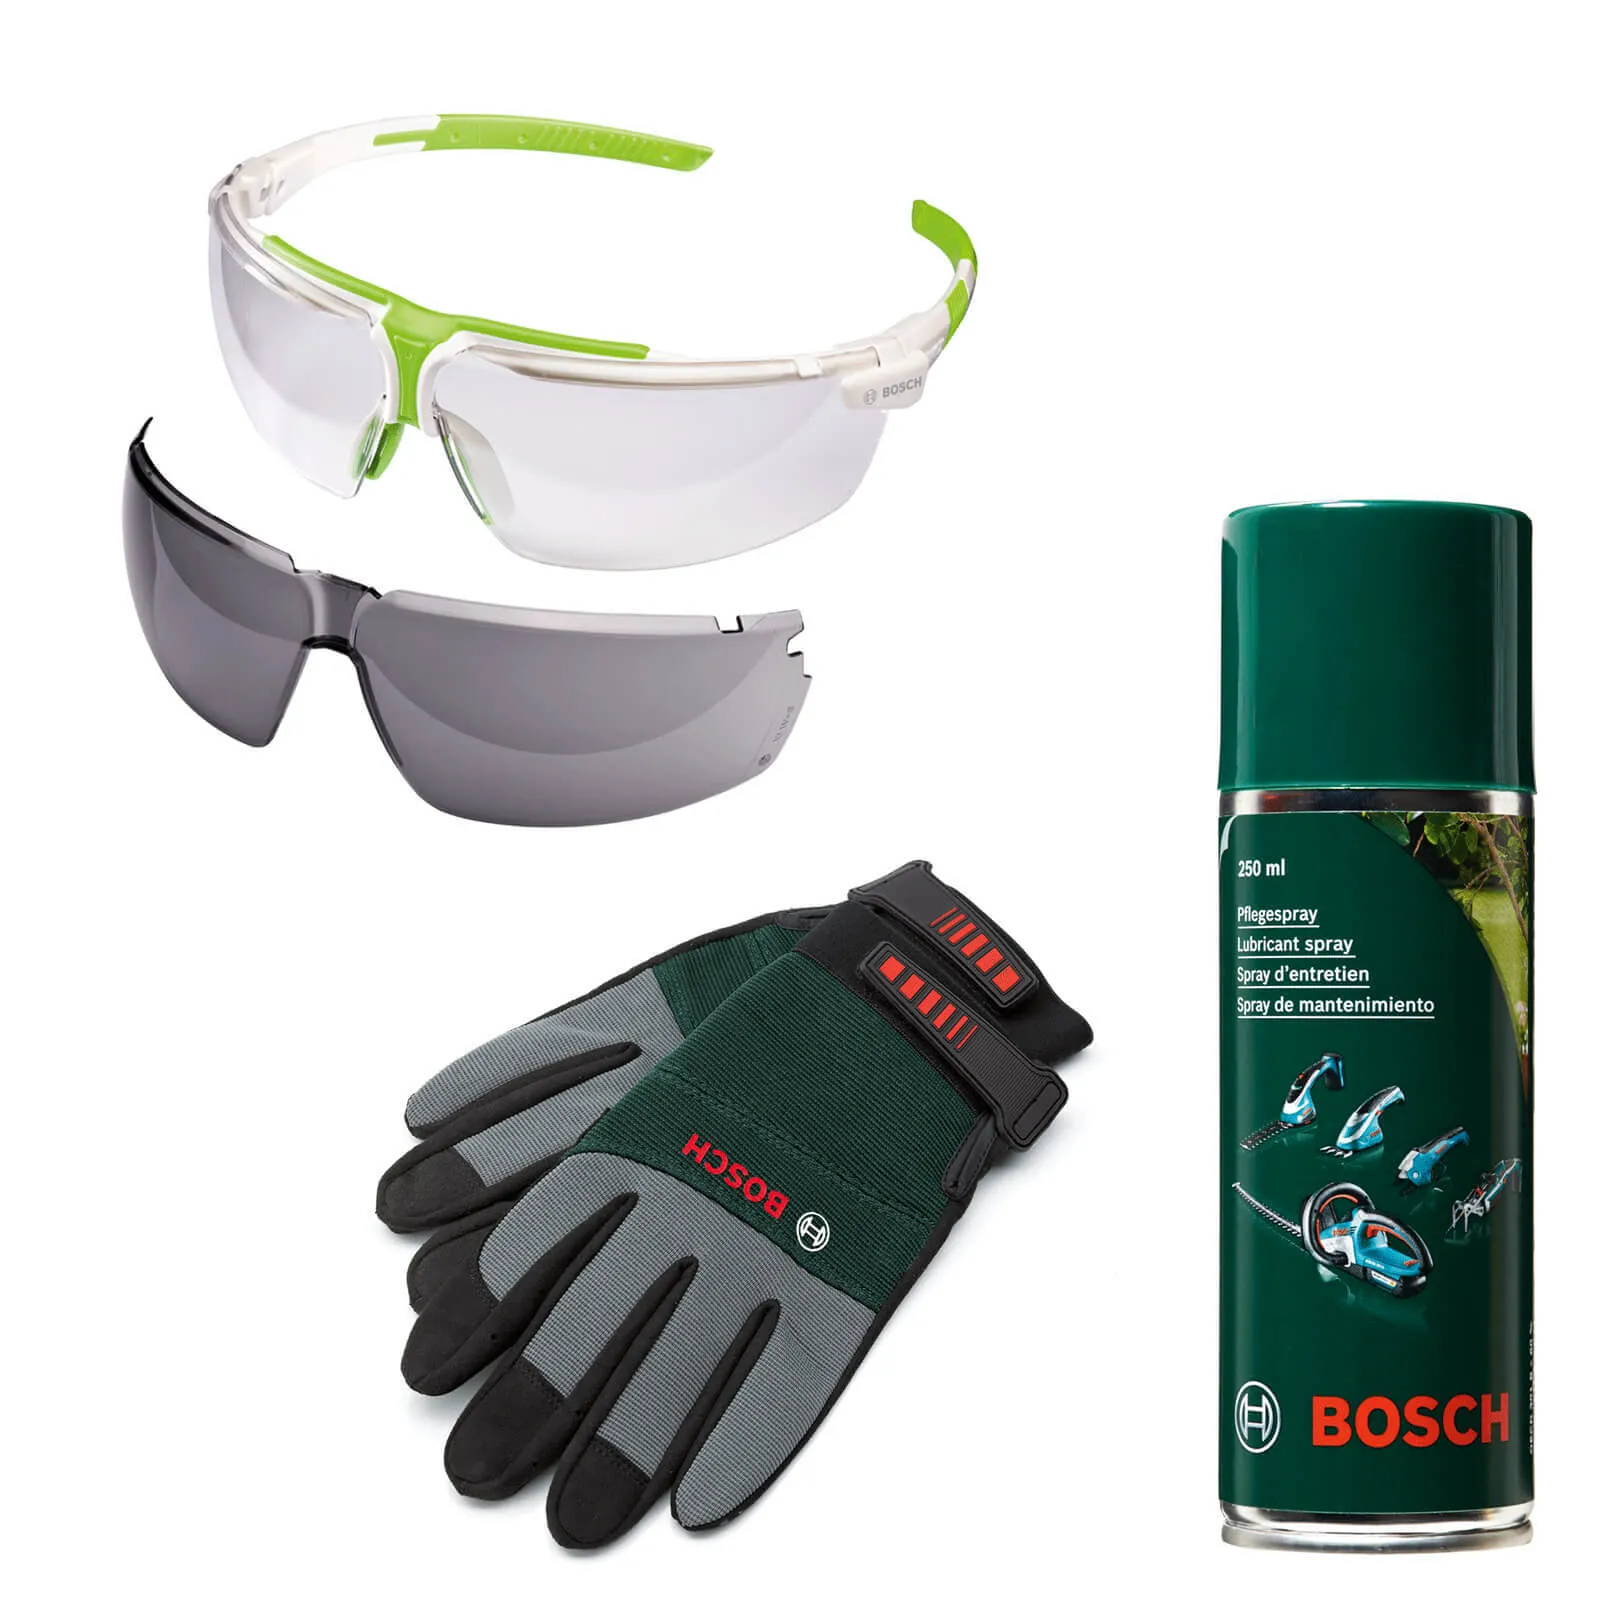 Bosch Outdoor Power Tool Safety and Maintenance Kit